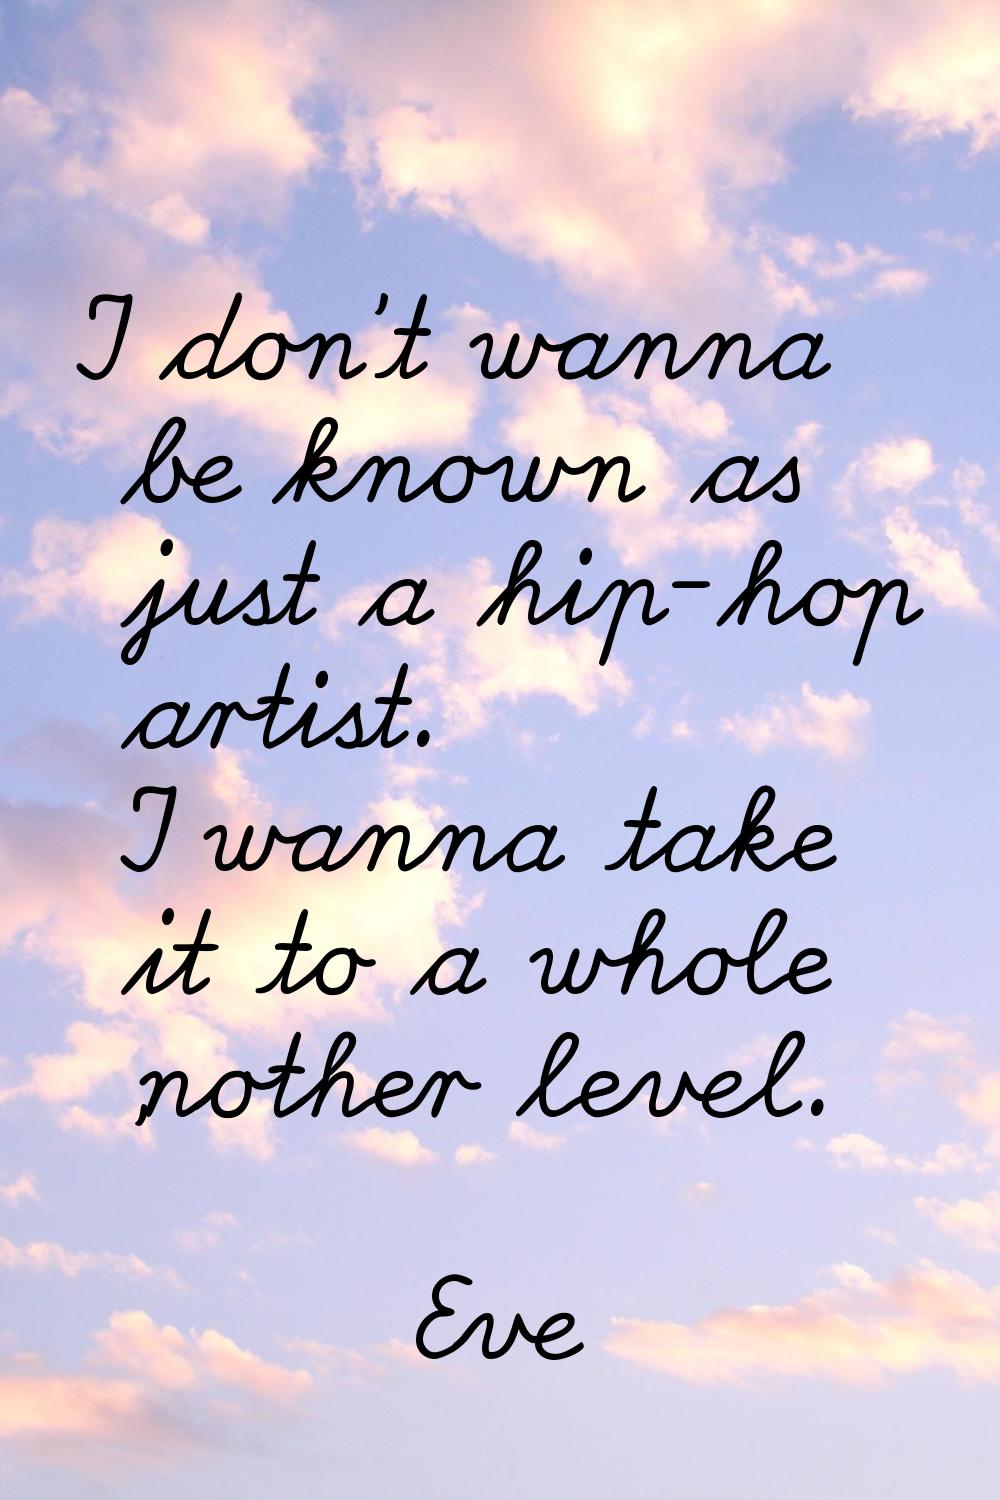 I don't wanna be known as just a hip-hop artist. I wanna take it to a whole 'nother level.